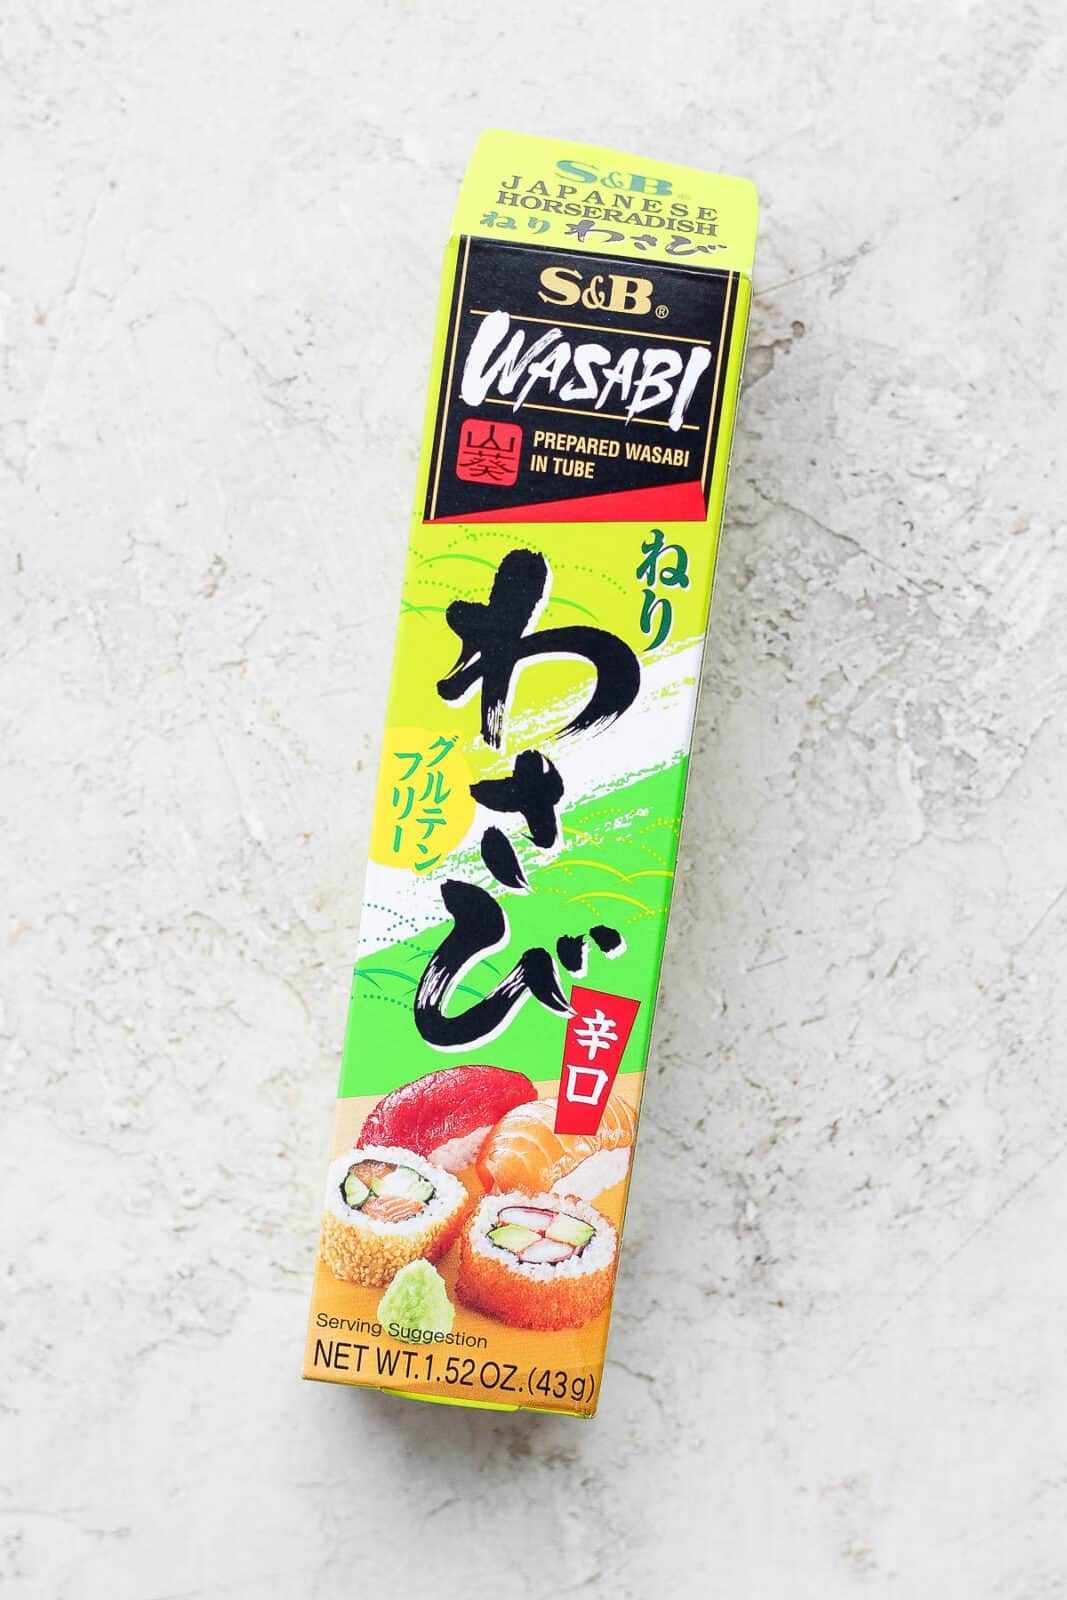 A tube of wasabi.